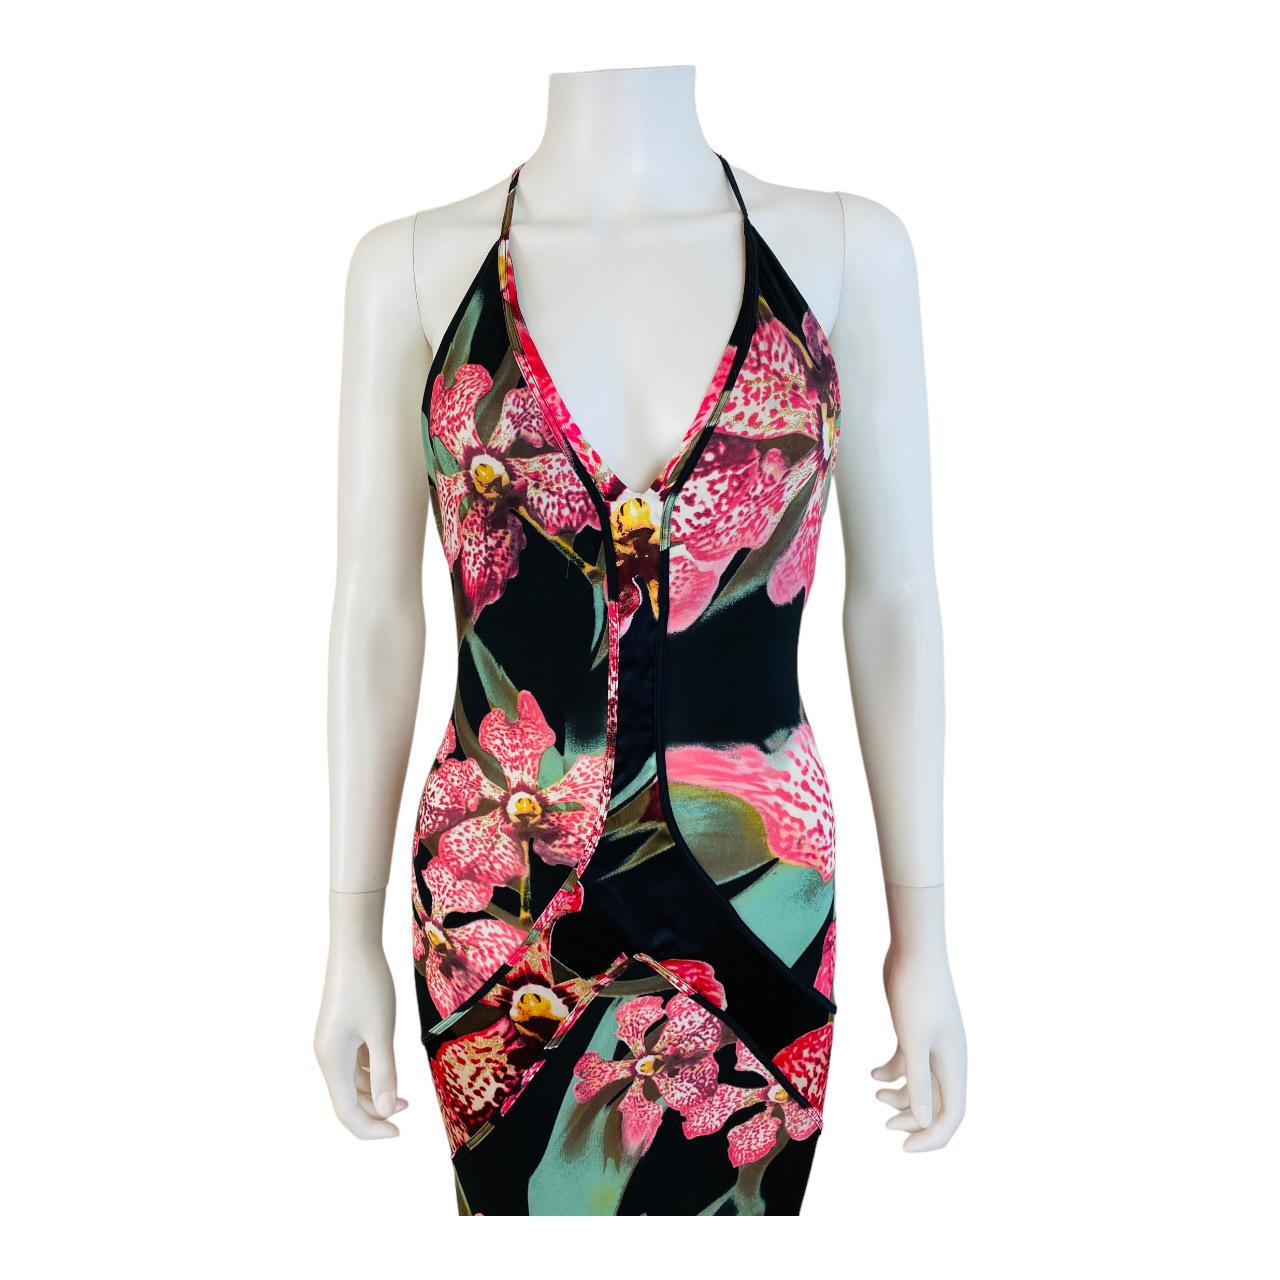 Women's Vintage Roberto Cavalli F/W 2004 Floral Orchid Print Pink + Black Dress Gown For Sale